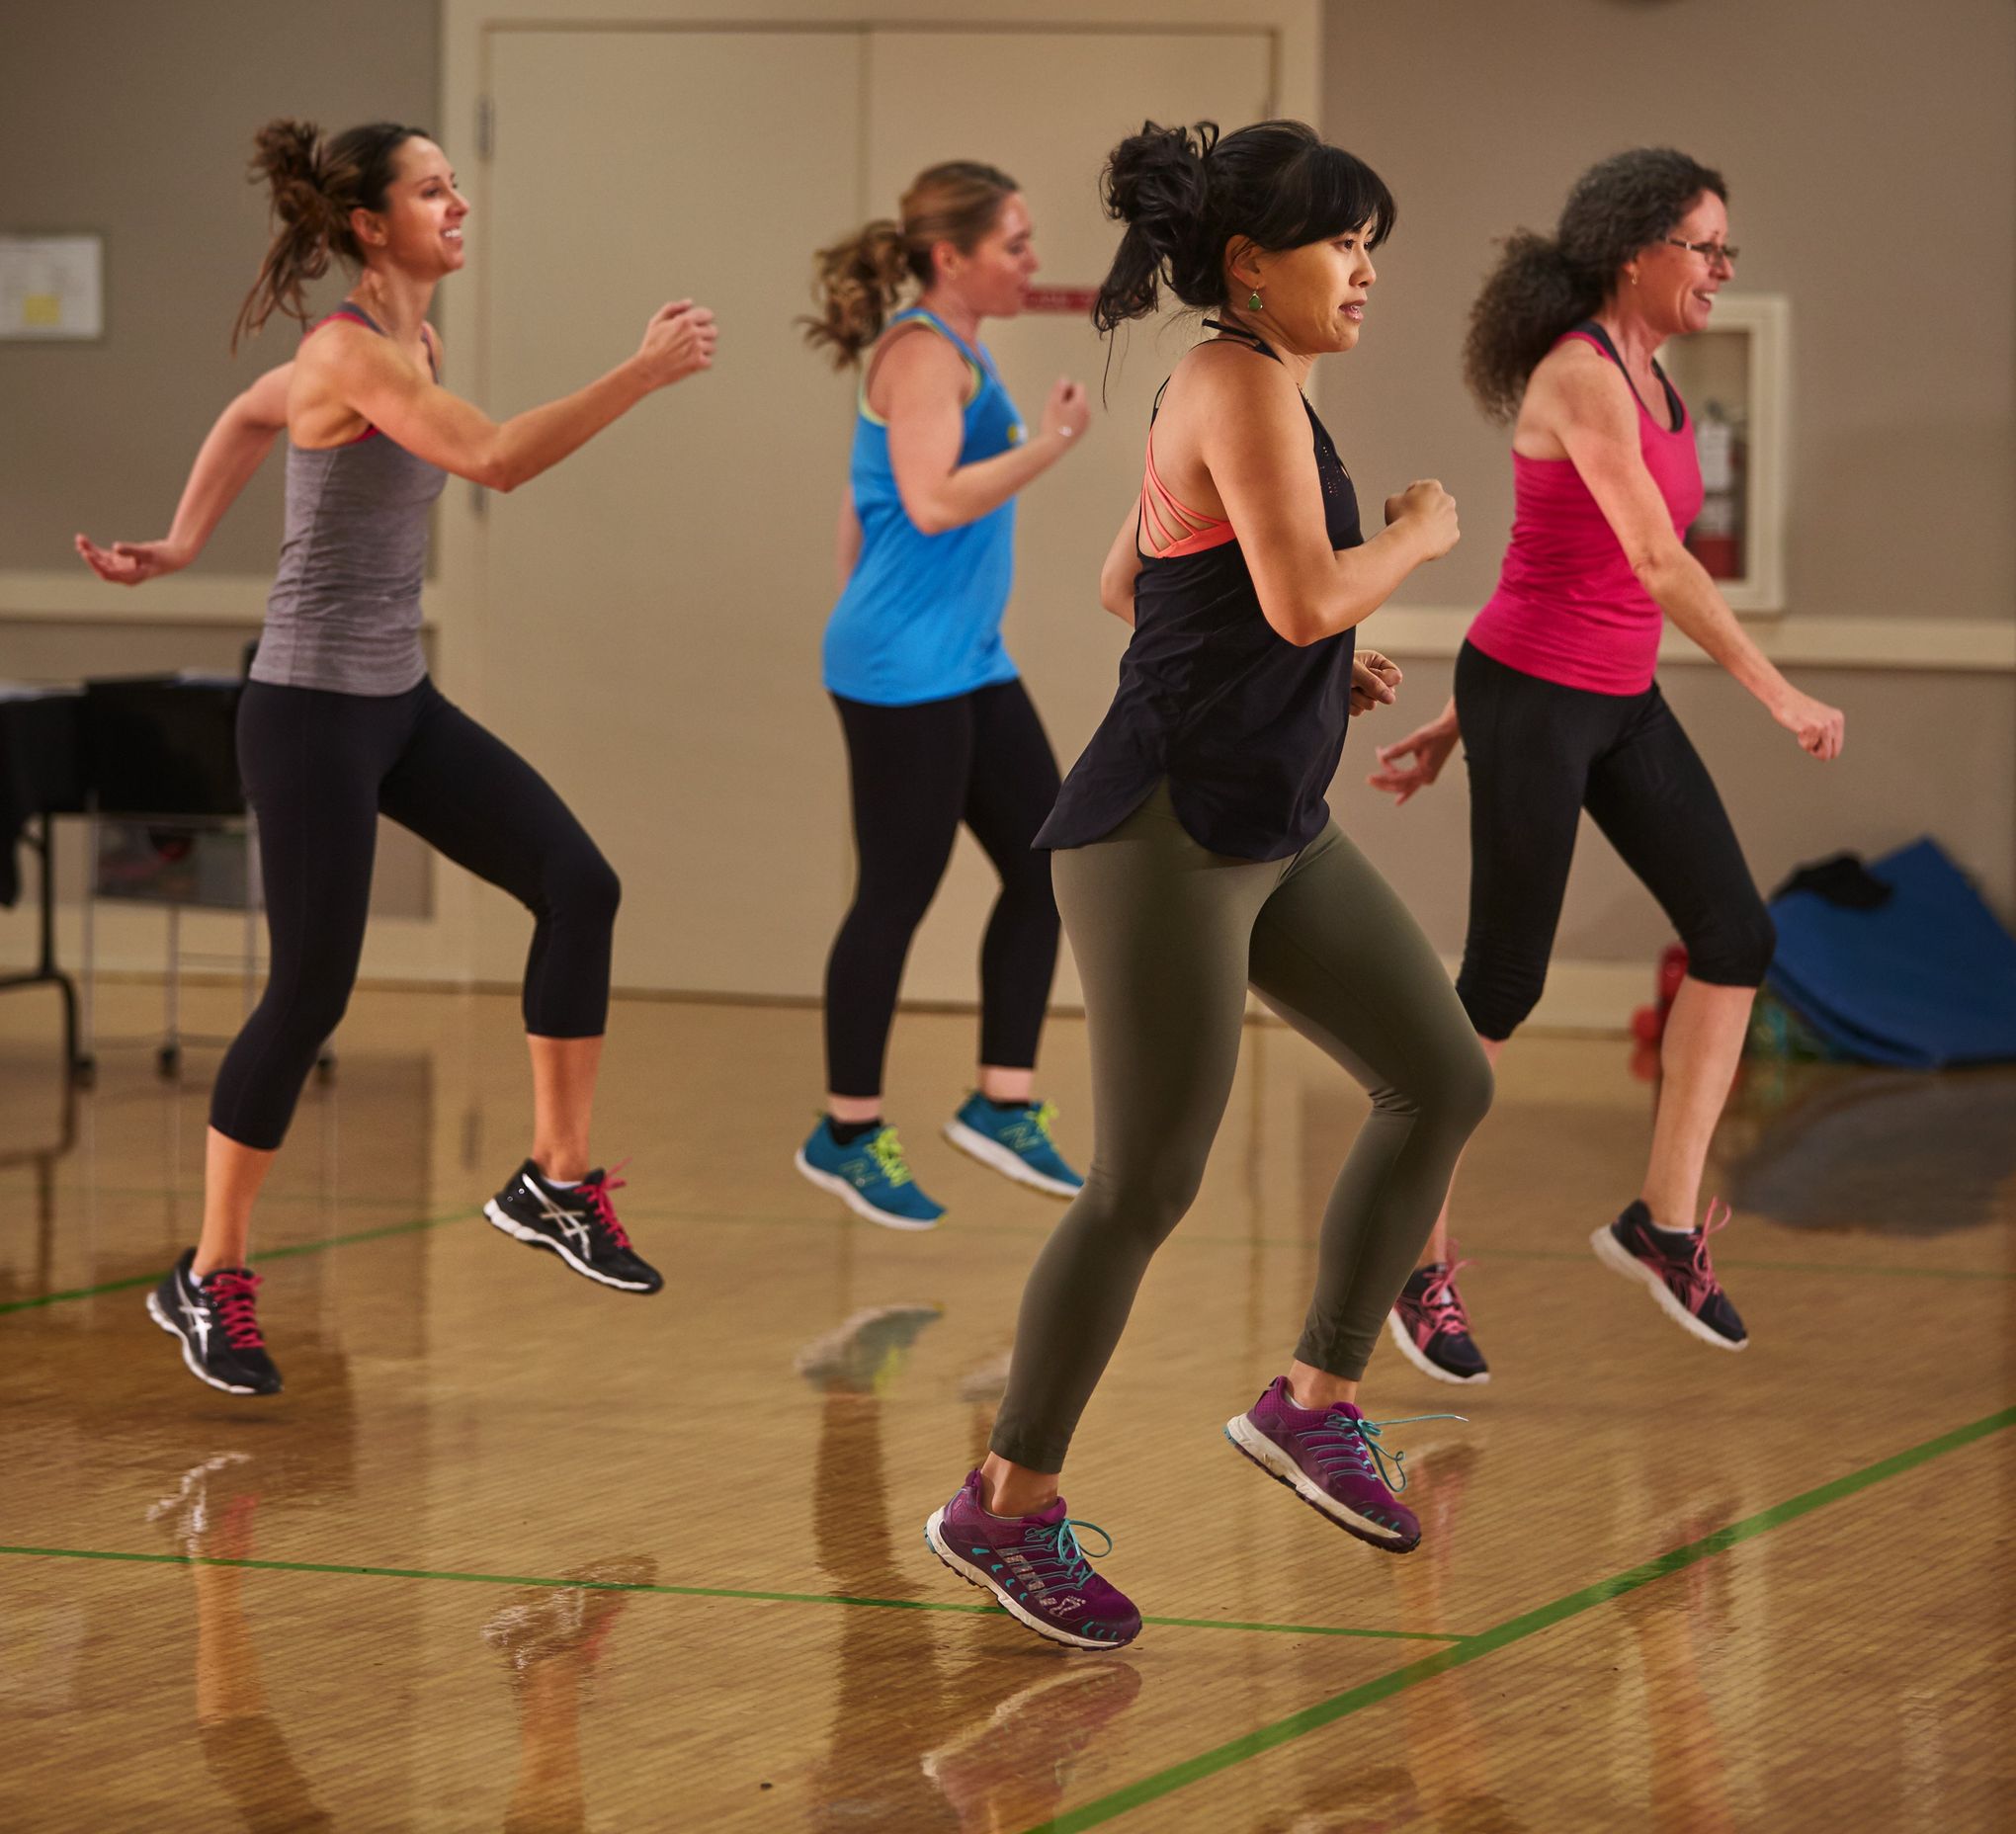 Sweating up a good time: Jazzercise promotes being healthy while